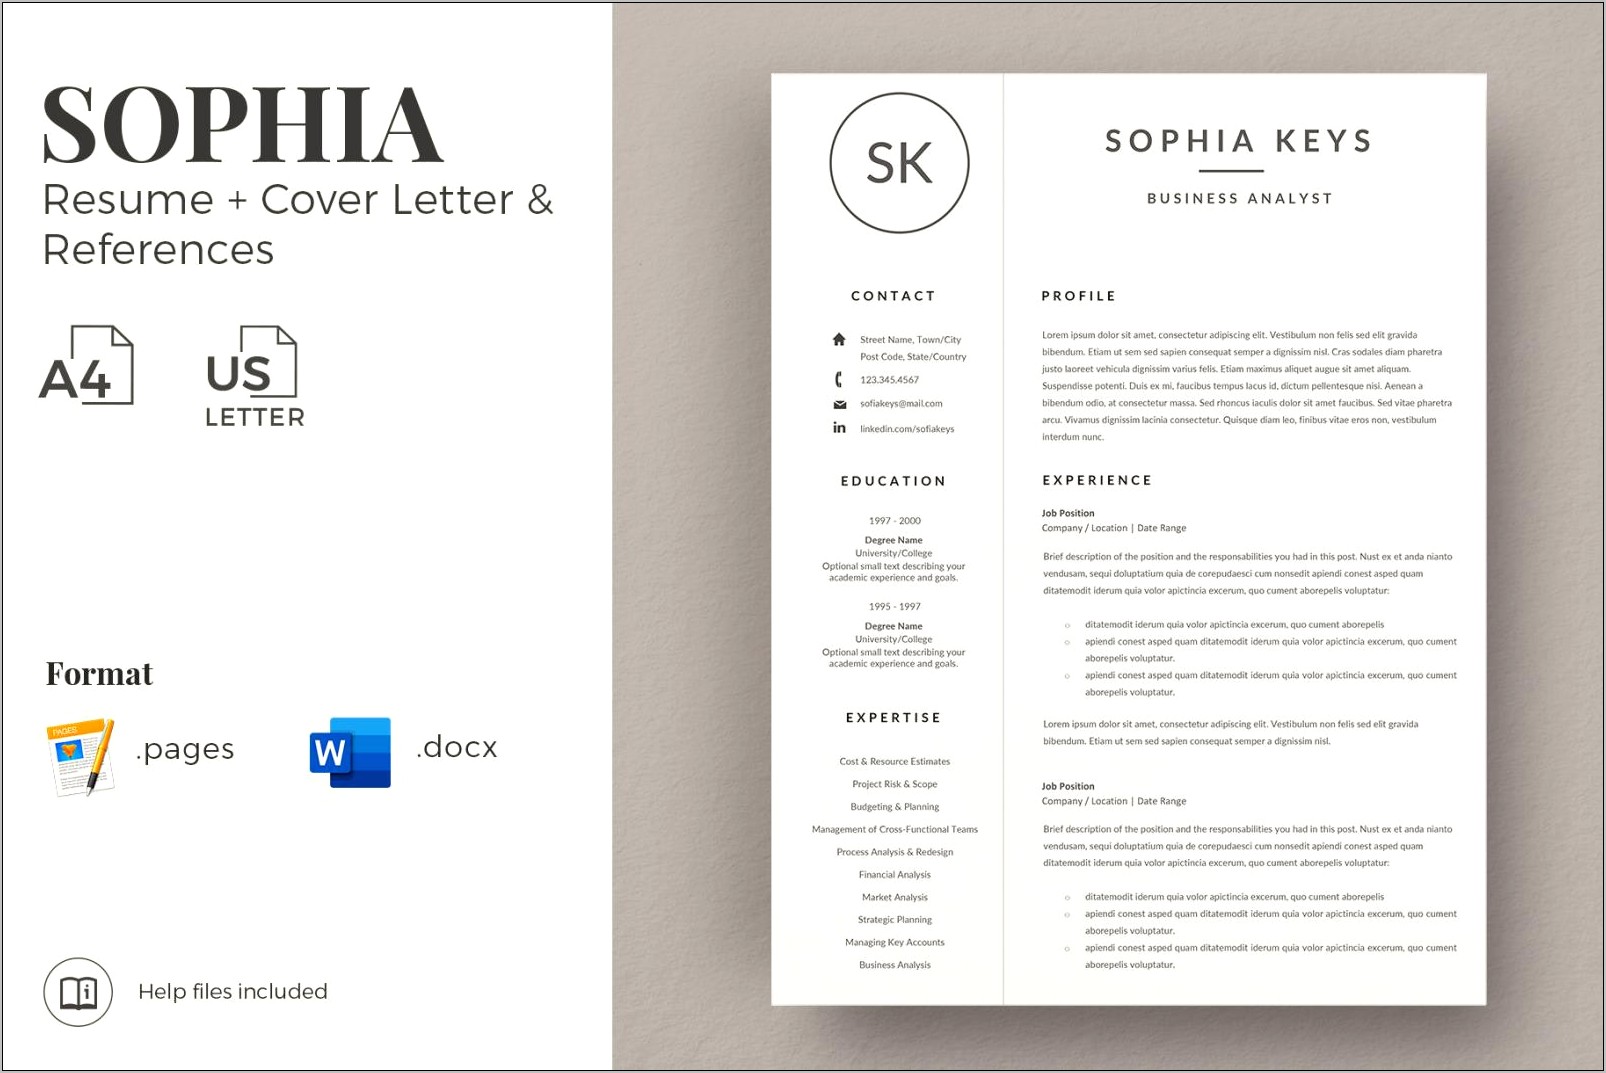 Microsoft Word Templates Resumes And Cover Letter Sets